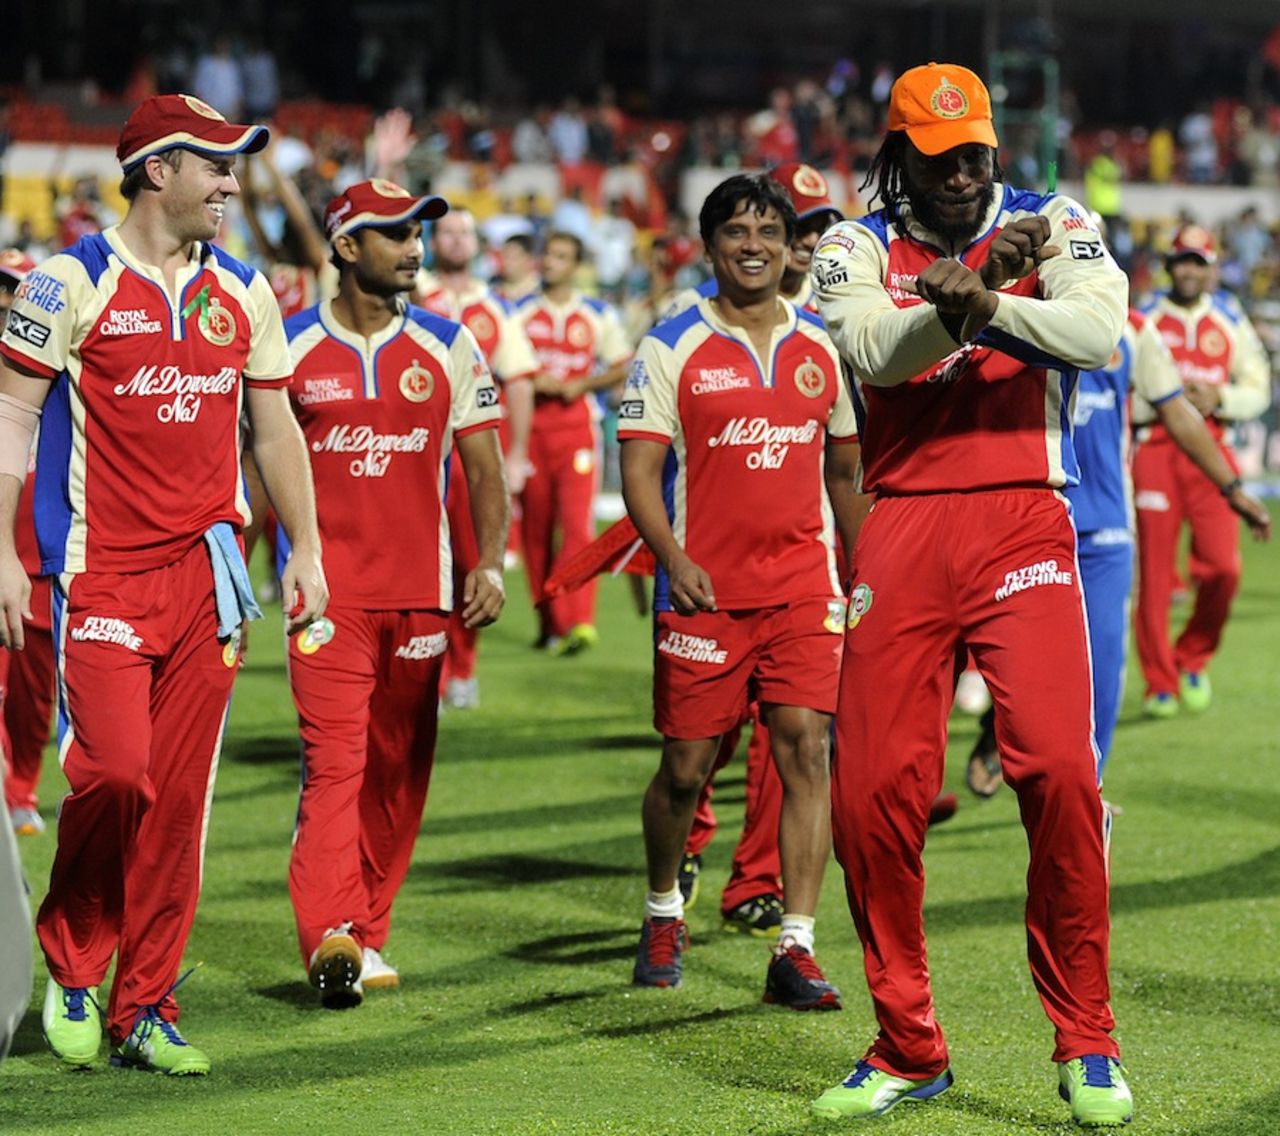 Chris Gayle leads his team for a lap around the ground, Royal Challengers Bangalore v Chennai Super Kings, IPL2013, Bangalore, May 18, 2013